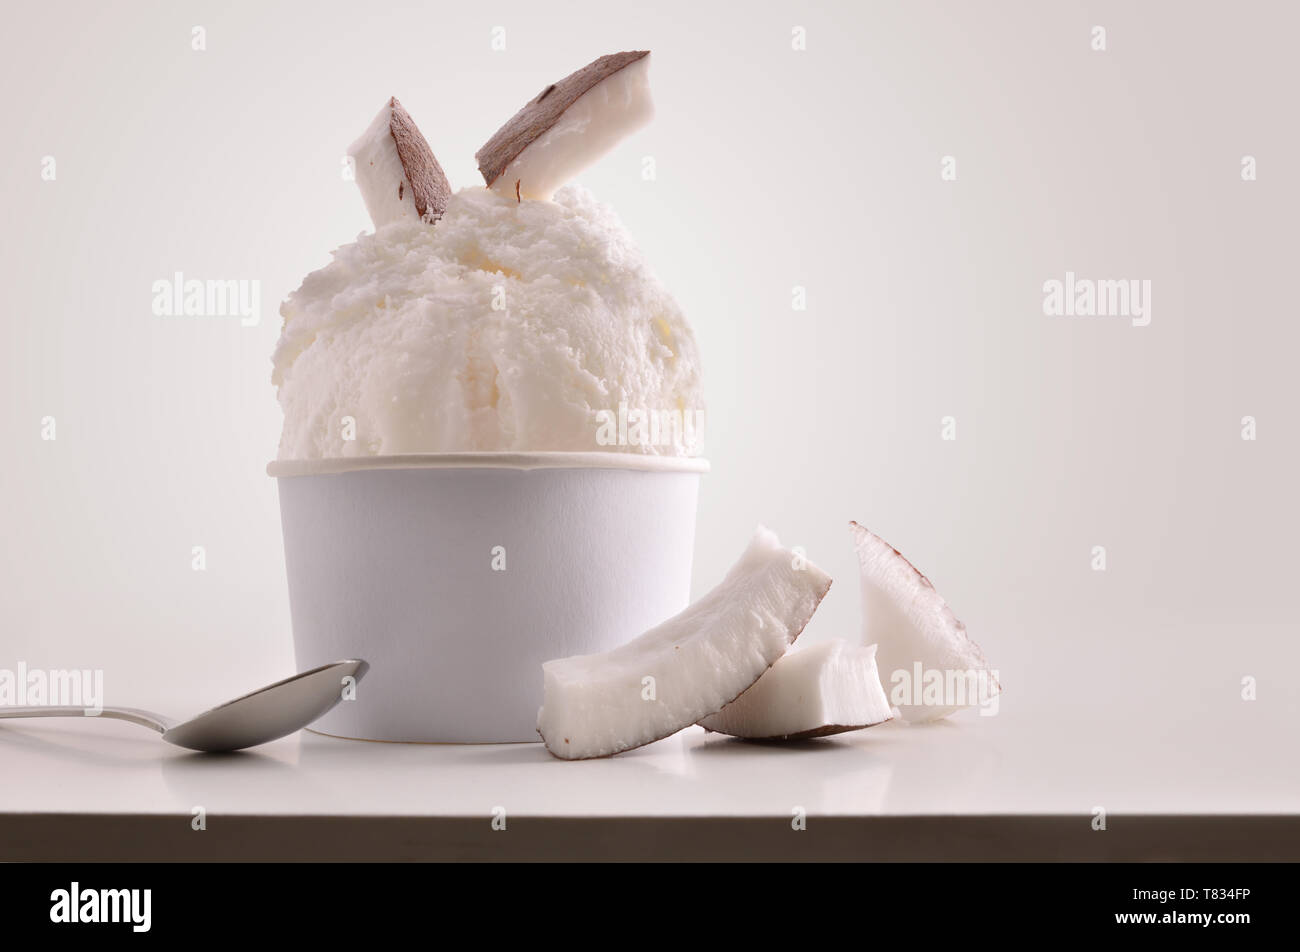 Ice cream balls in paper cup isolated on white background Stock Photo -  Alamy